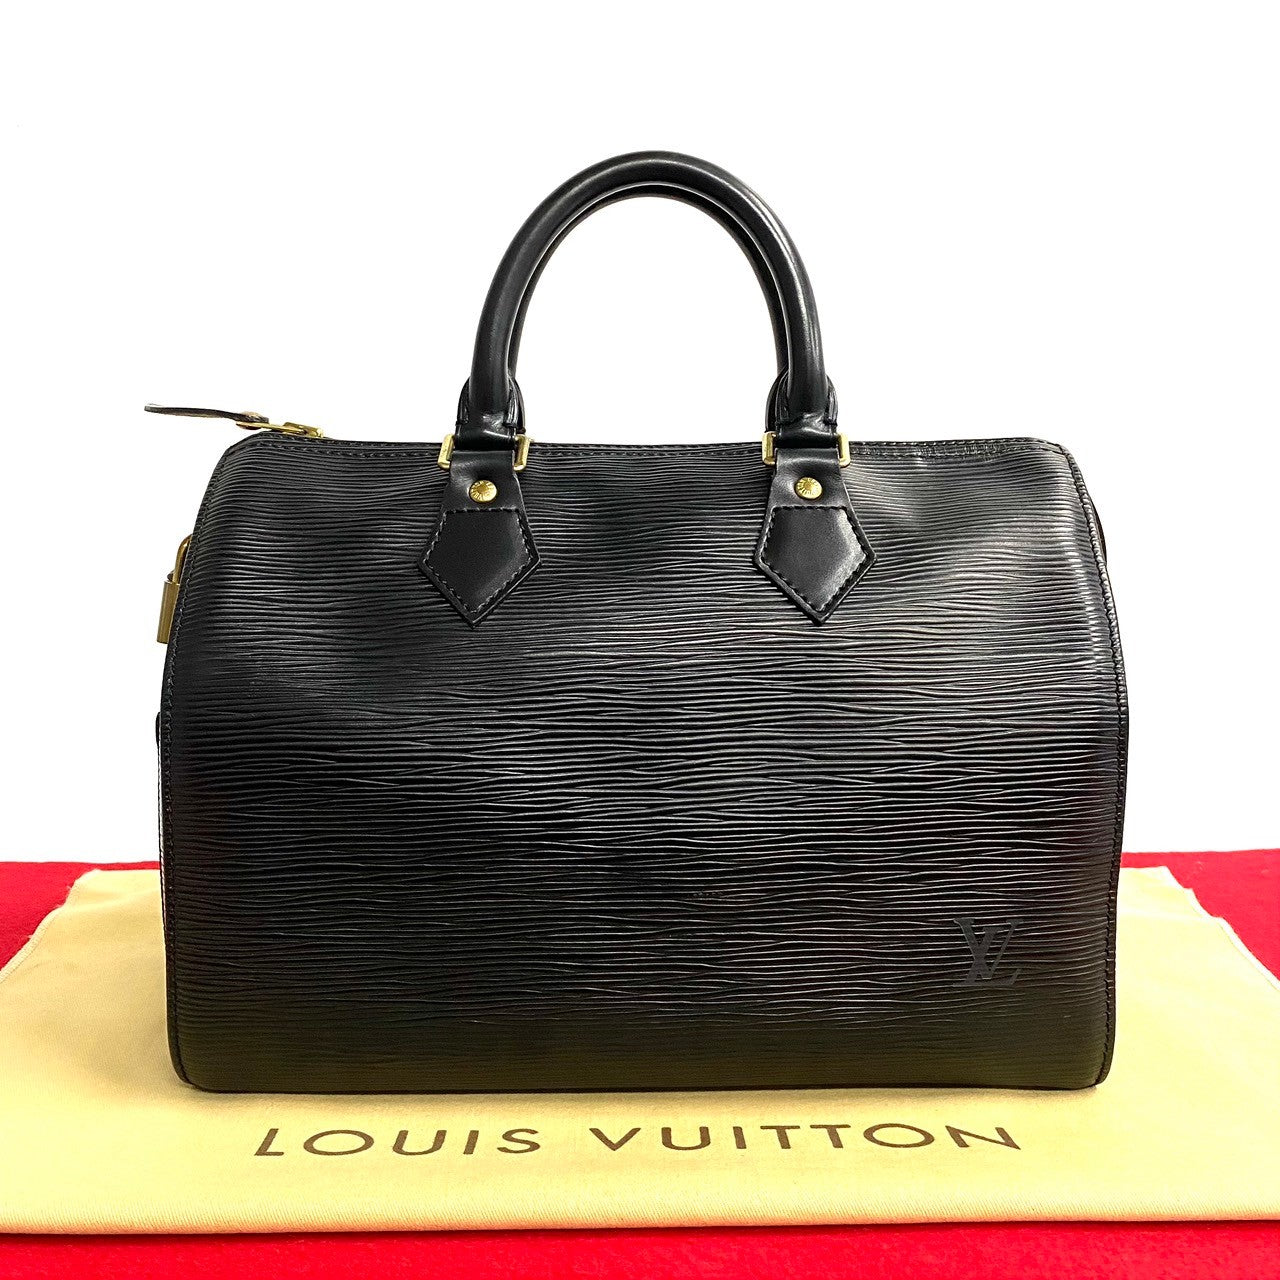 Louis Vuitton Speedy 25 Leather Tote Bag Speedy 25 in Excellent condition